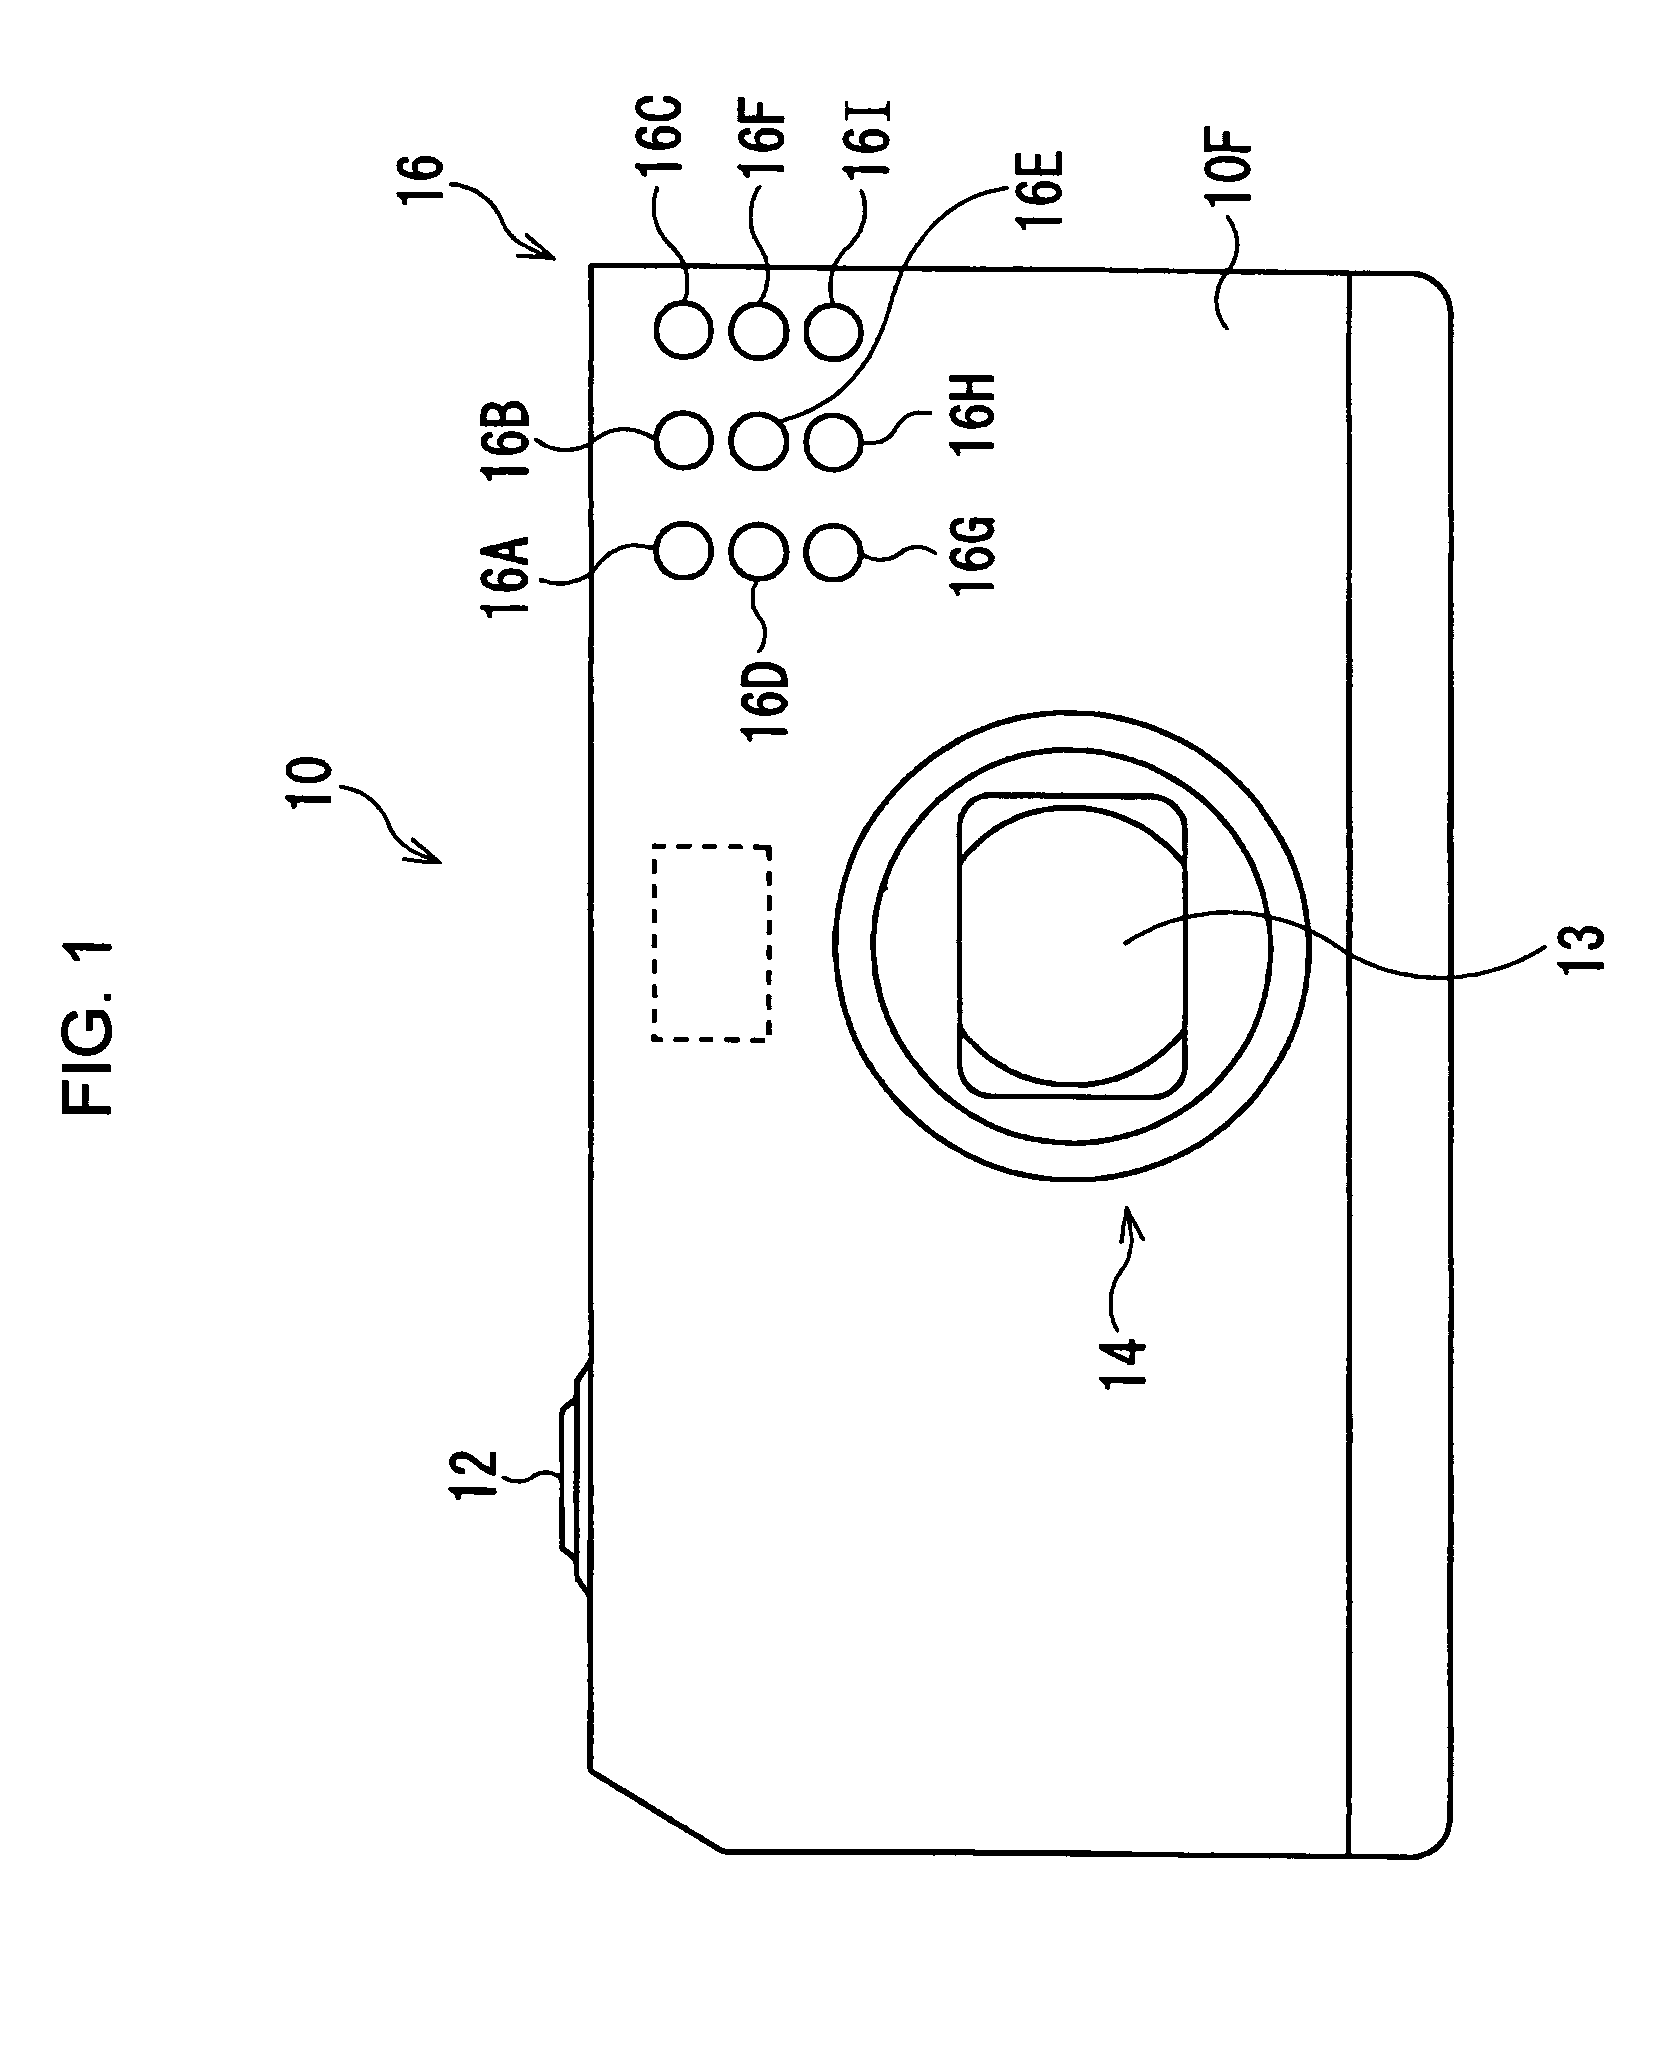 Light-amount control device for photographing